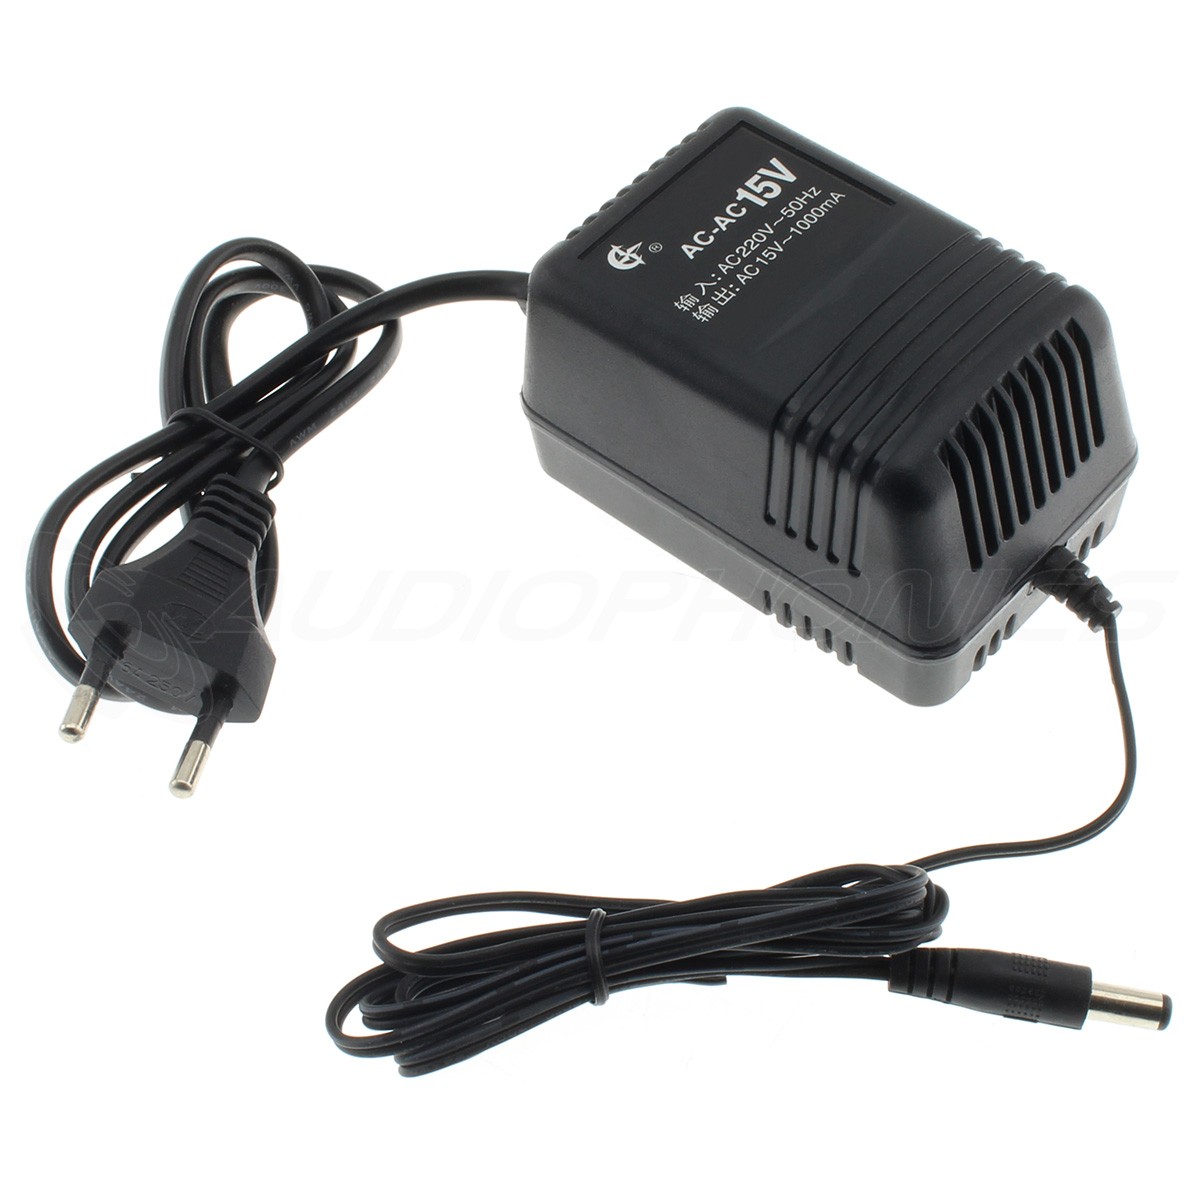 Power Adapter 220-230V AC to 15V 1A AC -